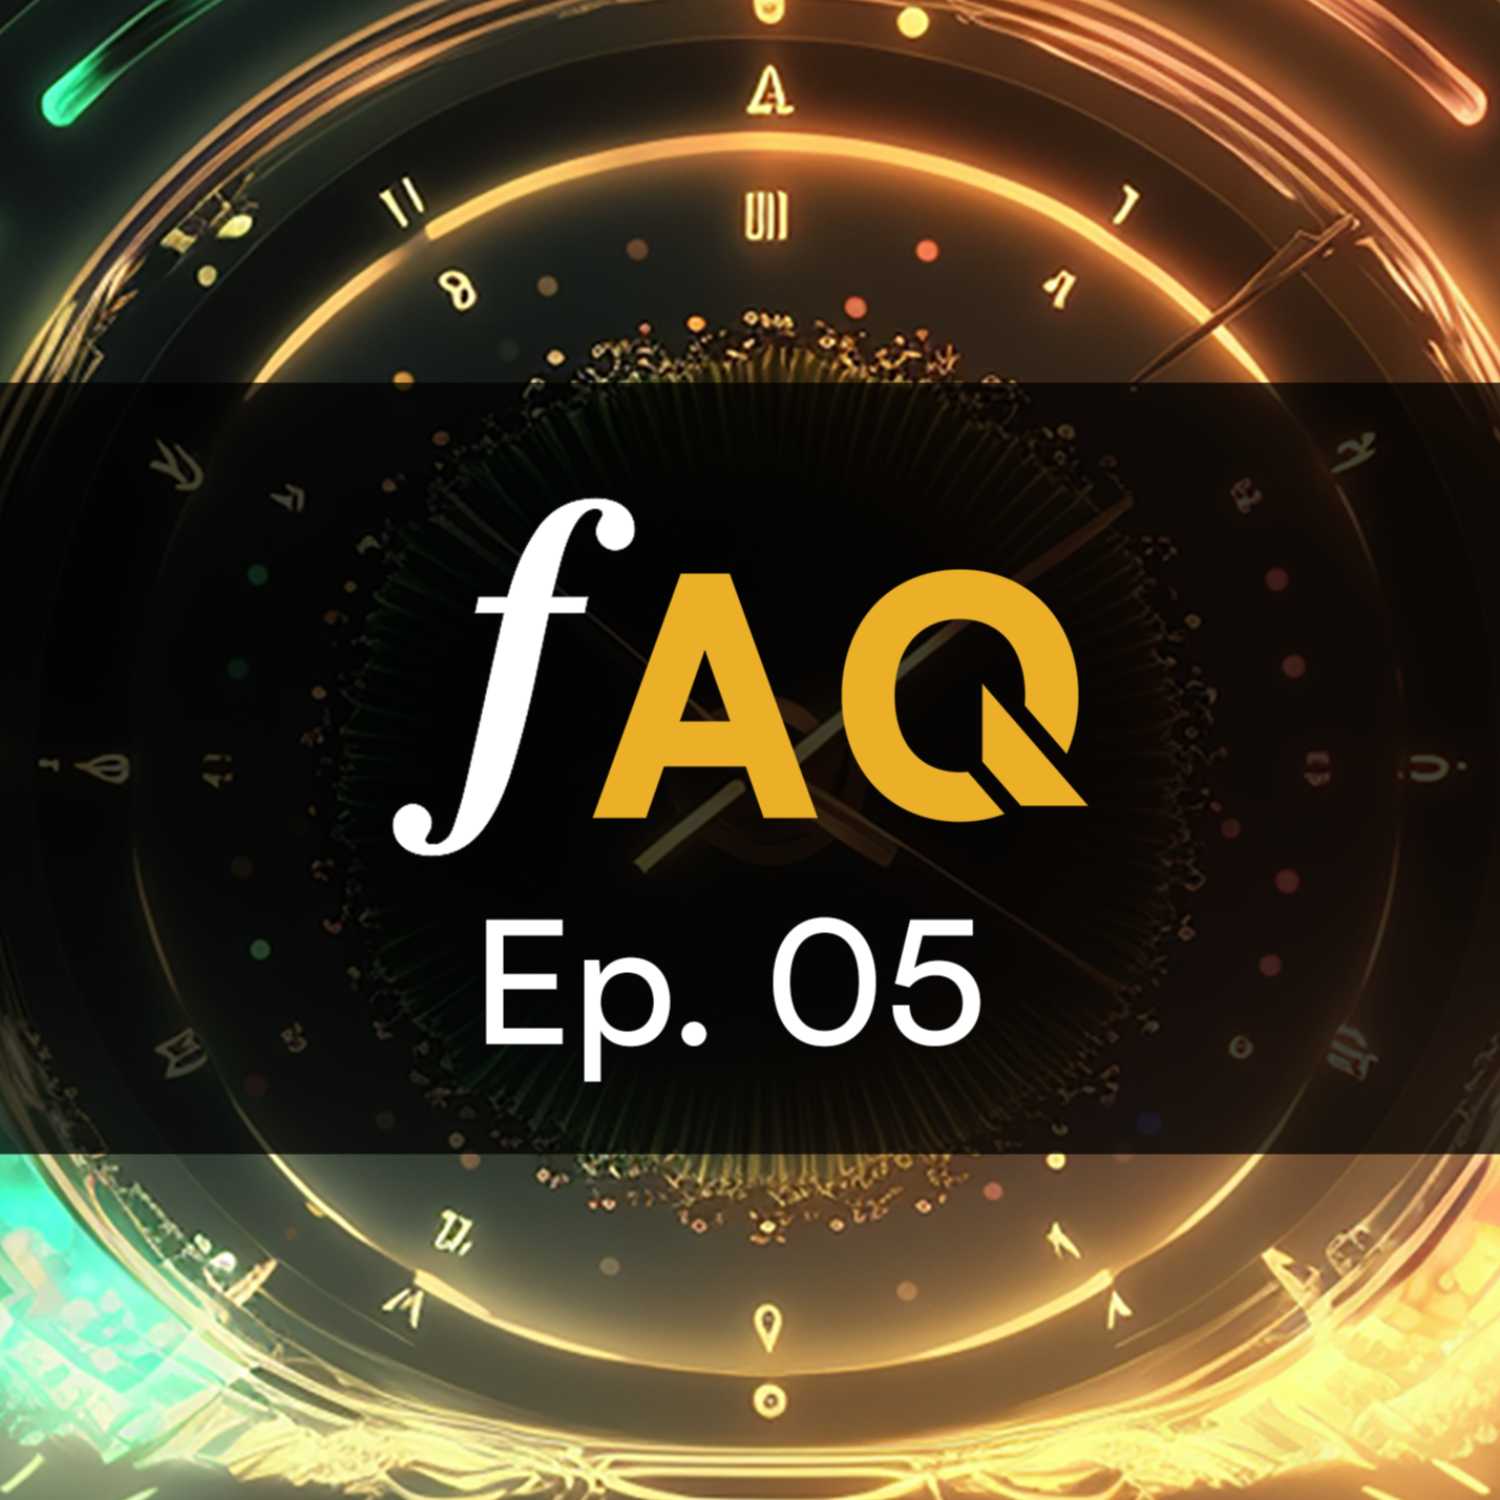 What’s the deal with quantum computers and cryptography? | fAQ podcast - ep. 05